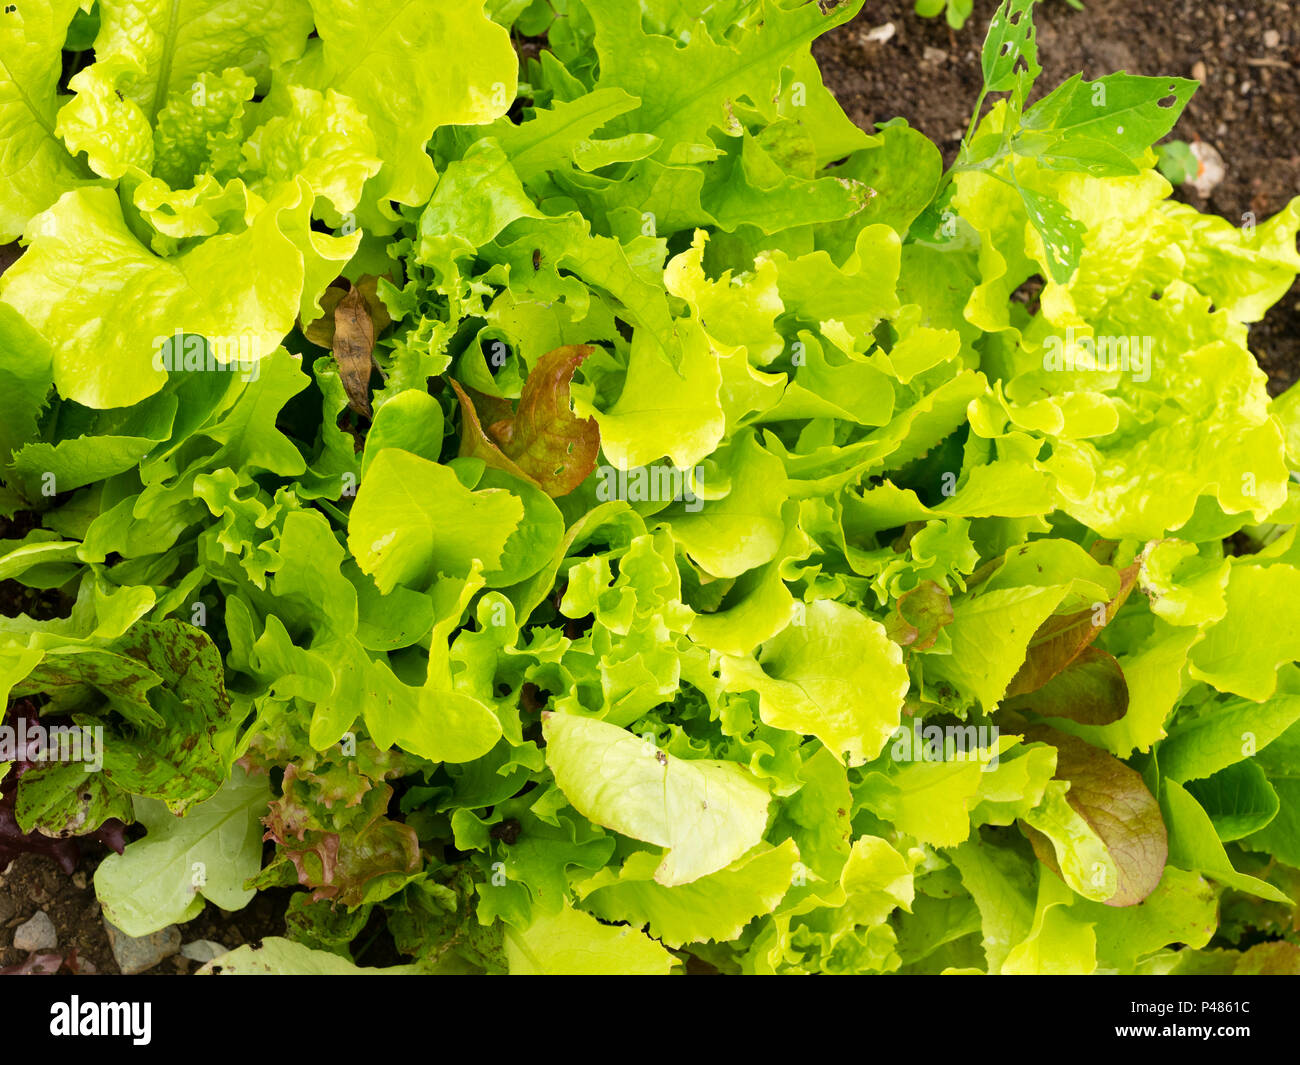 Mixed salad leaves of the 'Rocky Top mix' lettuce strain, Lactuca sativa, in the summer garden Stock Photo